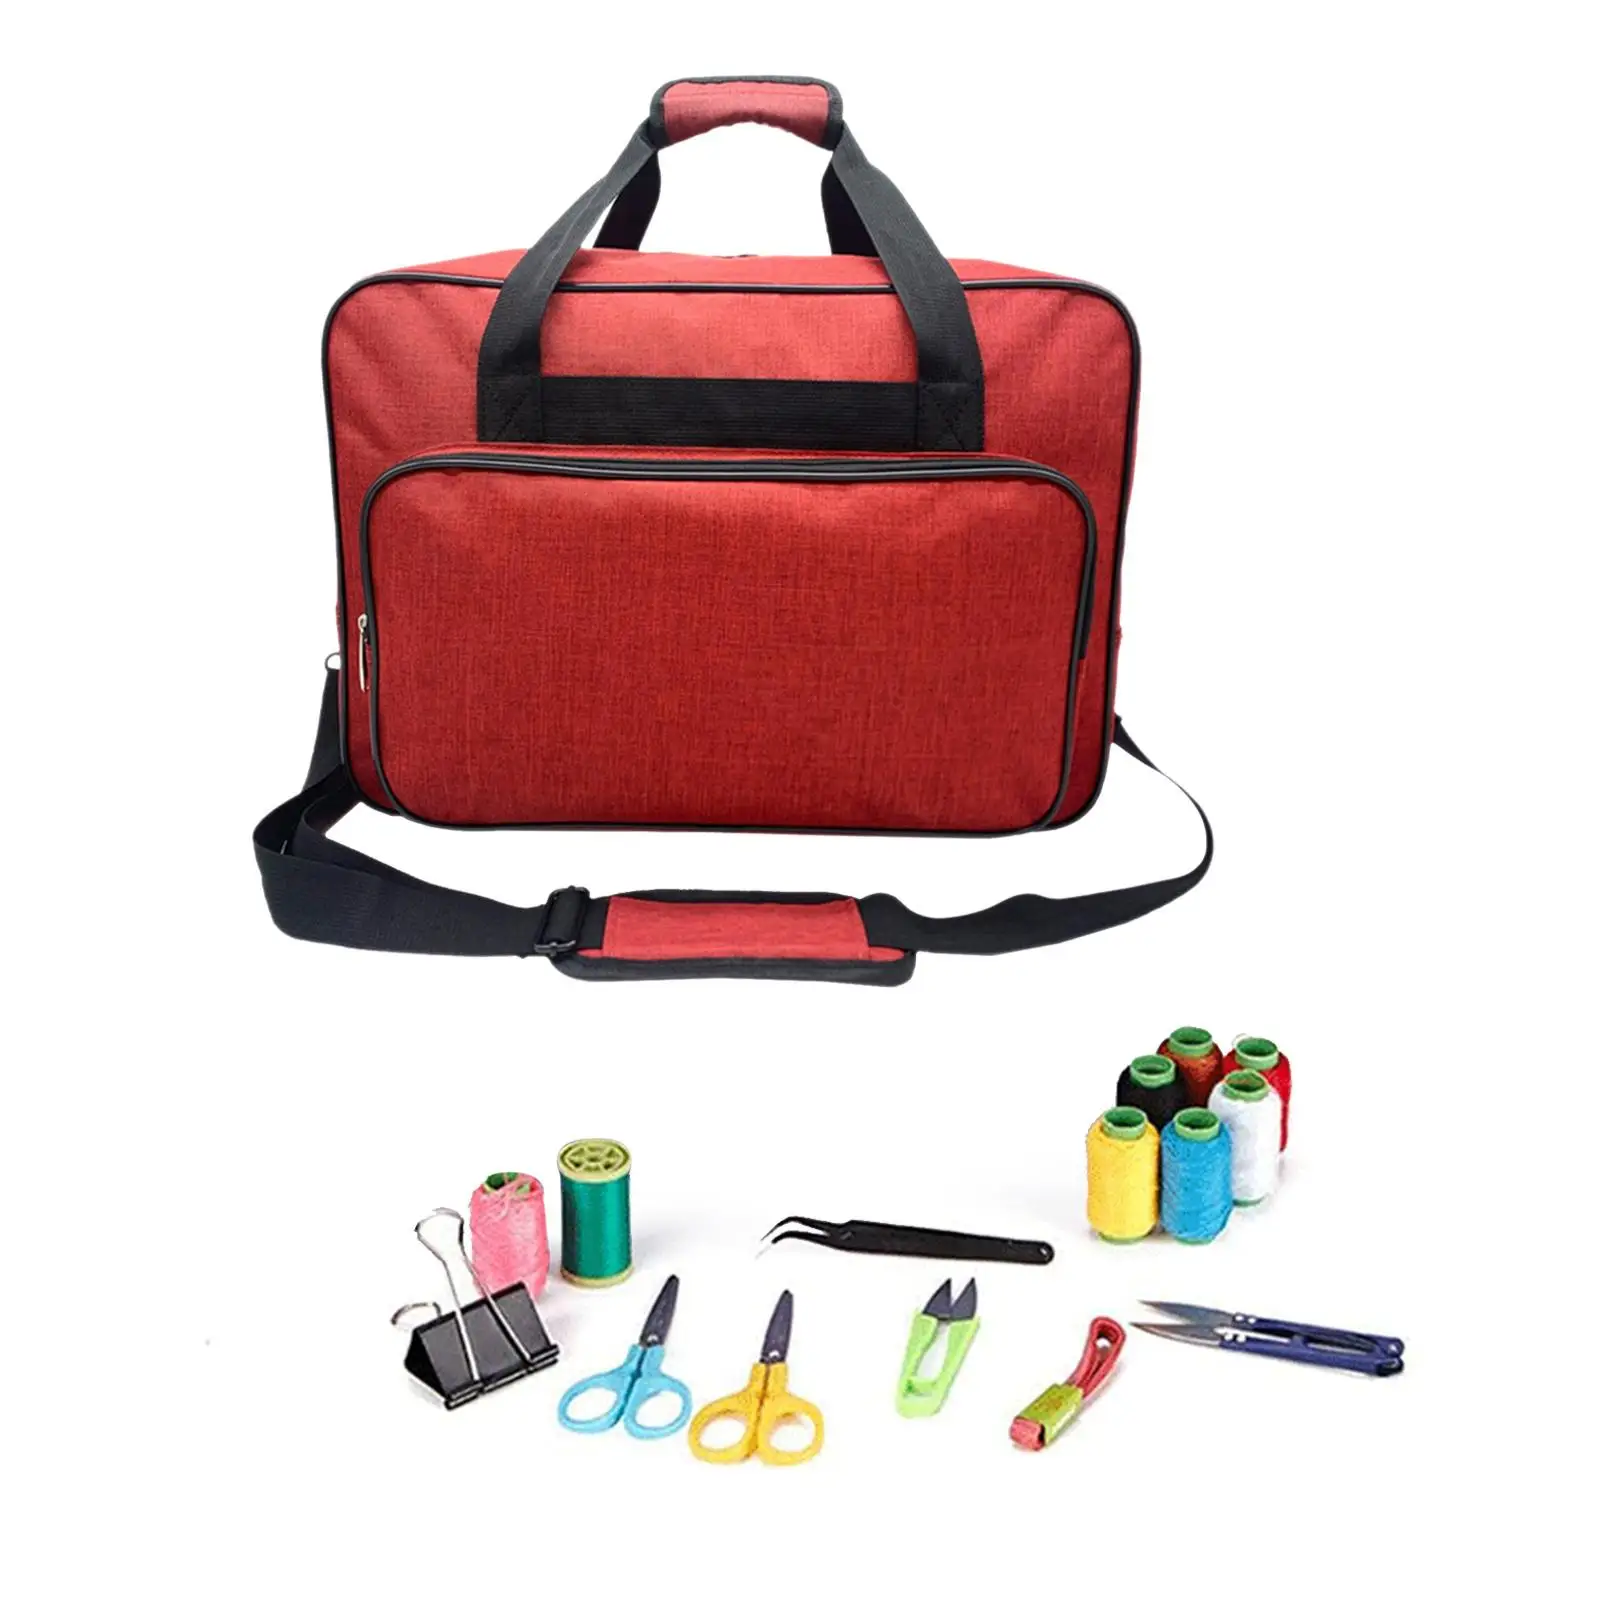 Sewing Machine Carrying Case, Carry Tote Bag, Portable Storag with Pockets for Sewing Machine Padded Bag